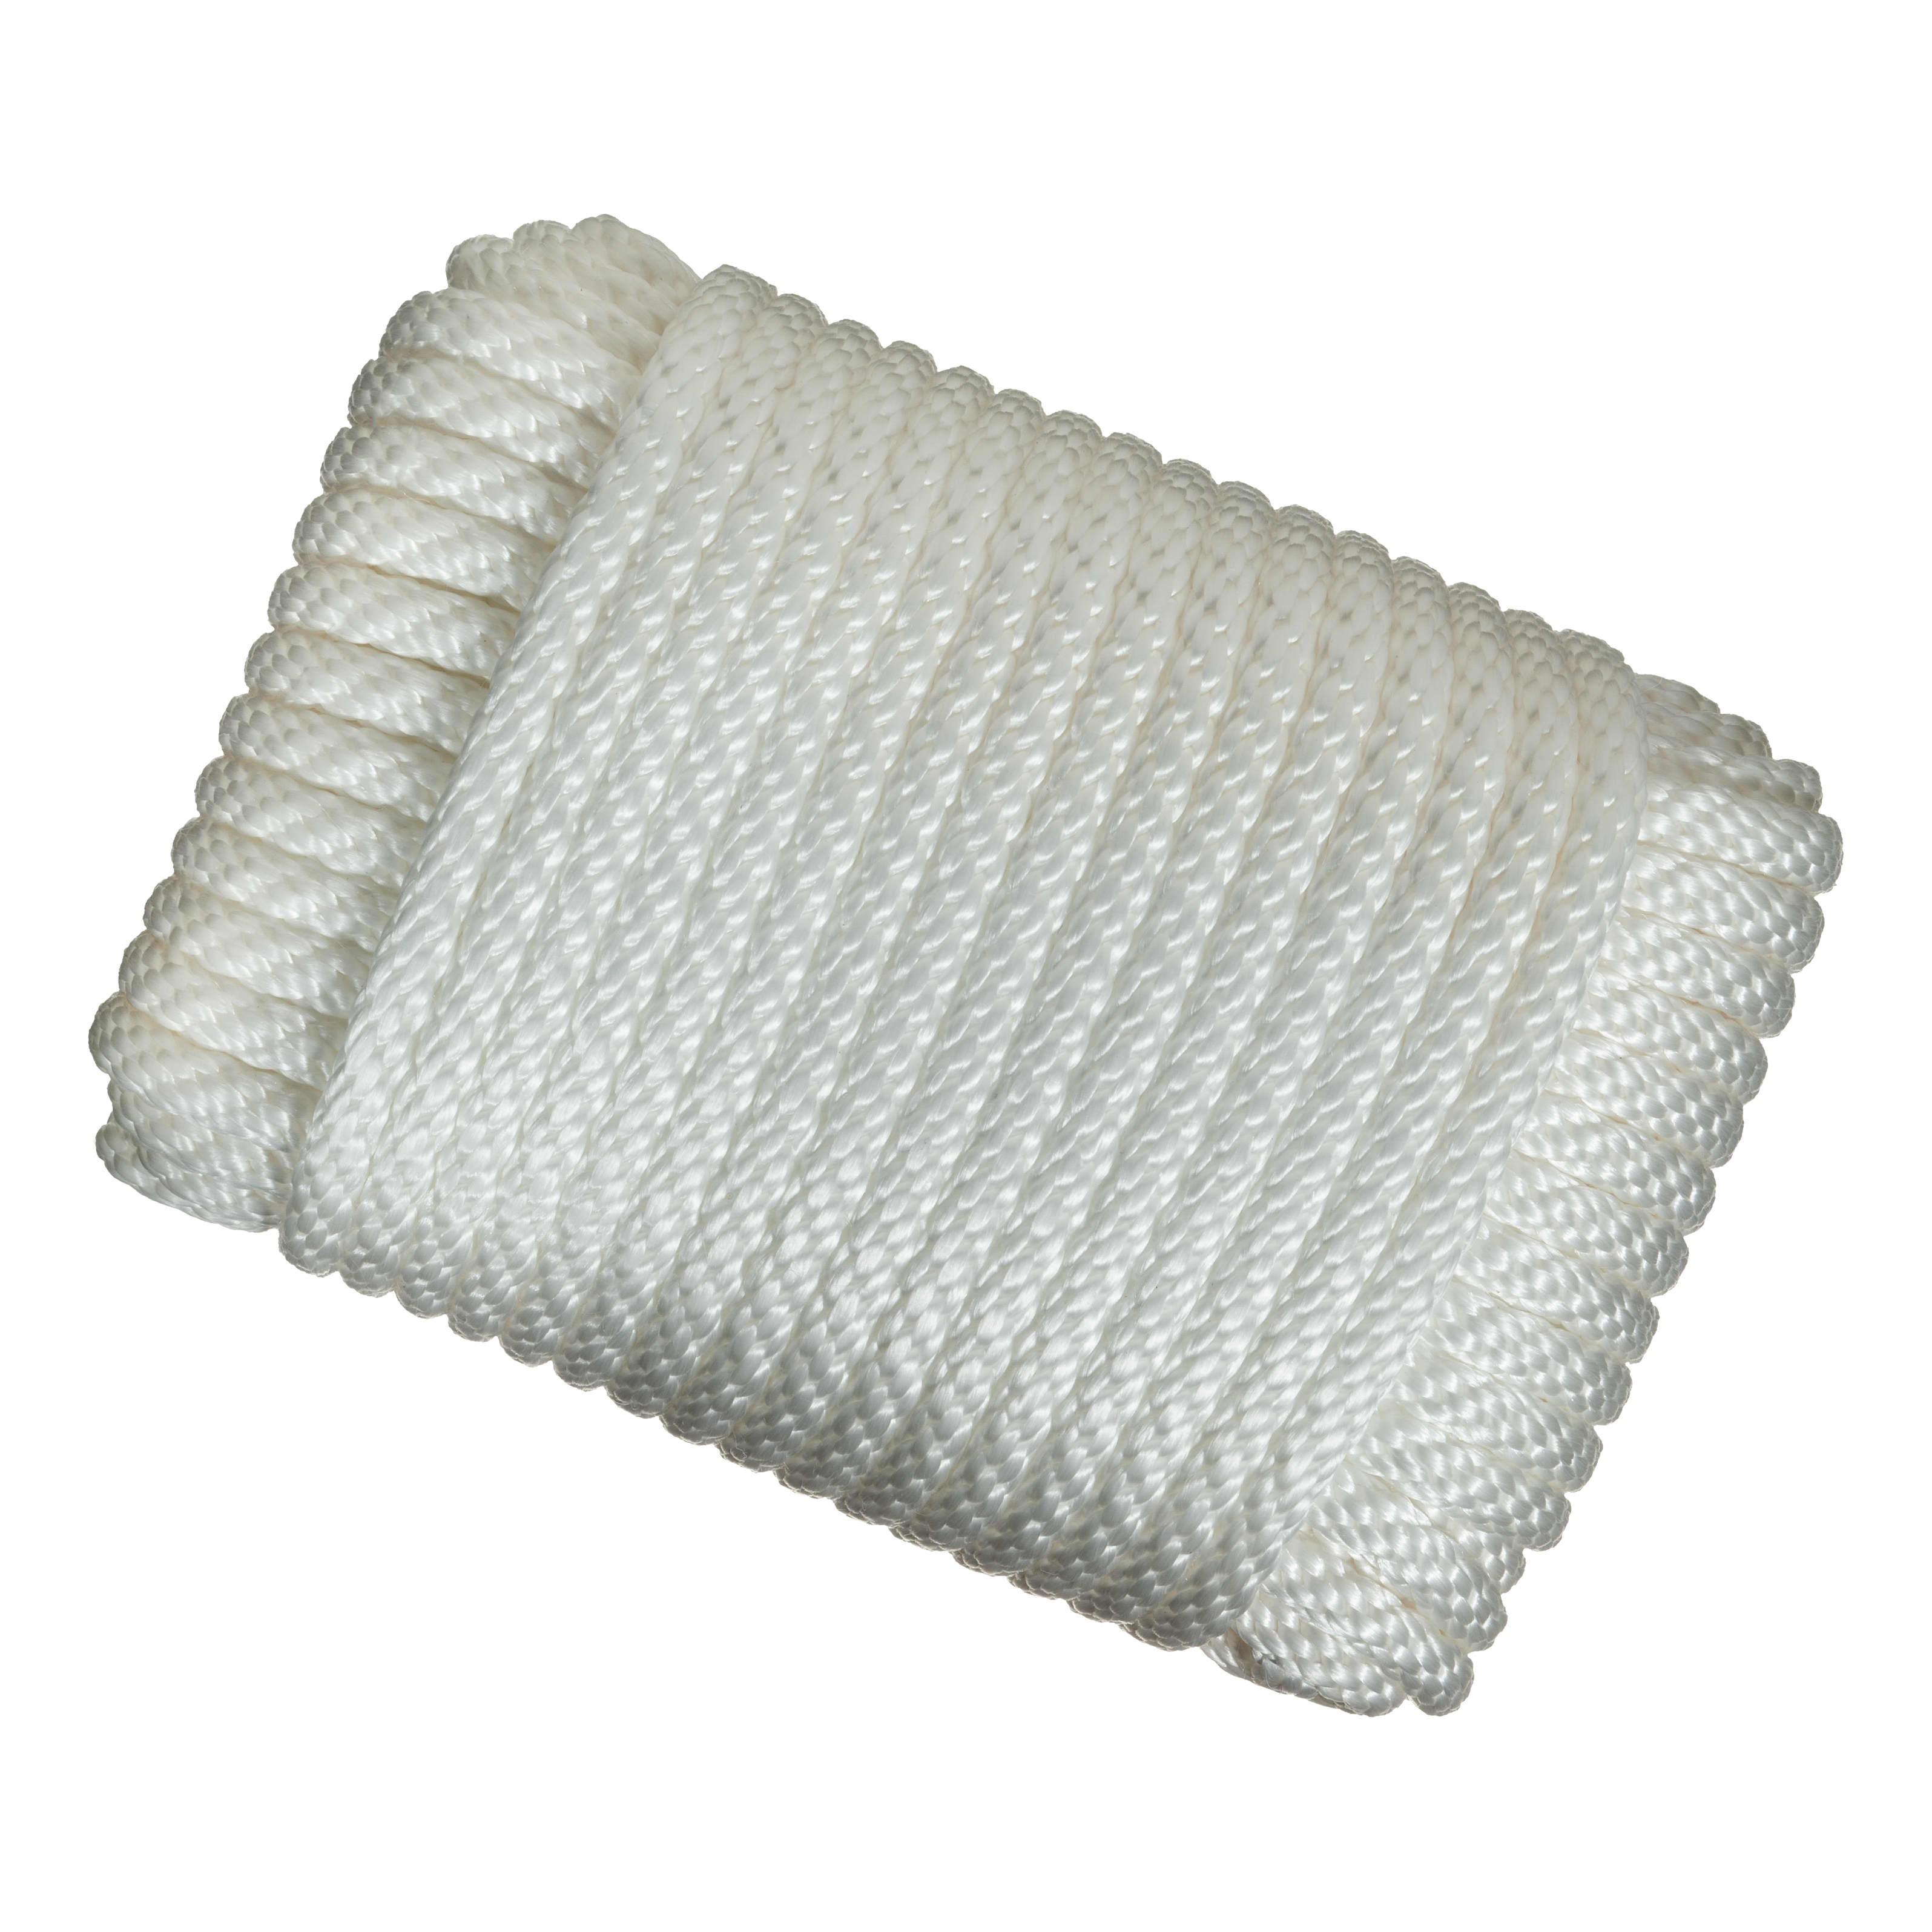 Bass Pro Shops Solid Braid MFP Rope - White - 3/8" x 100'